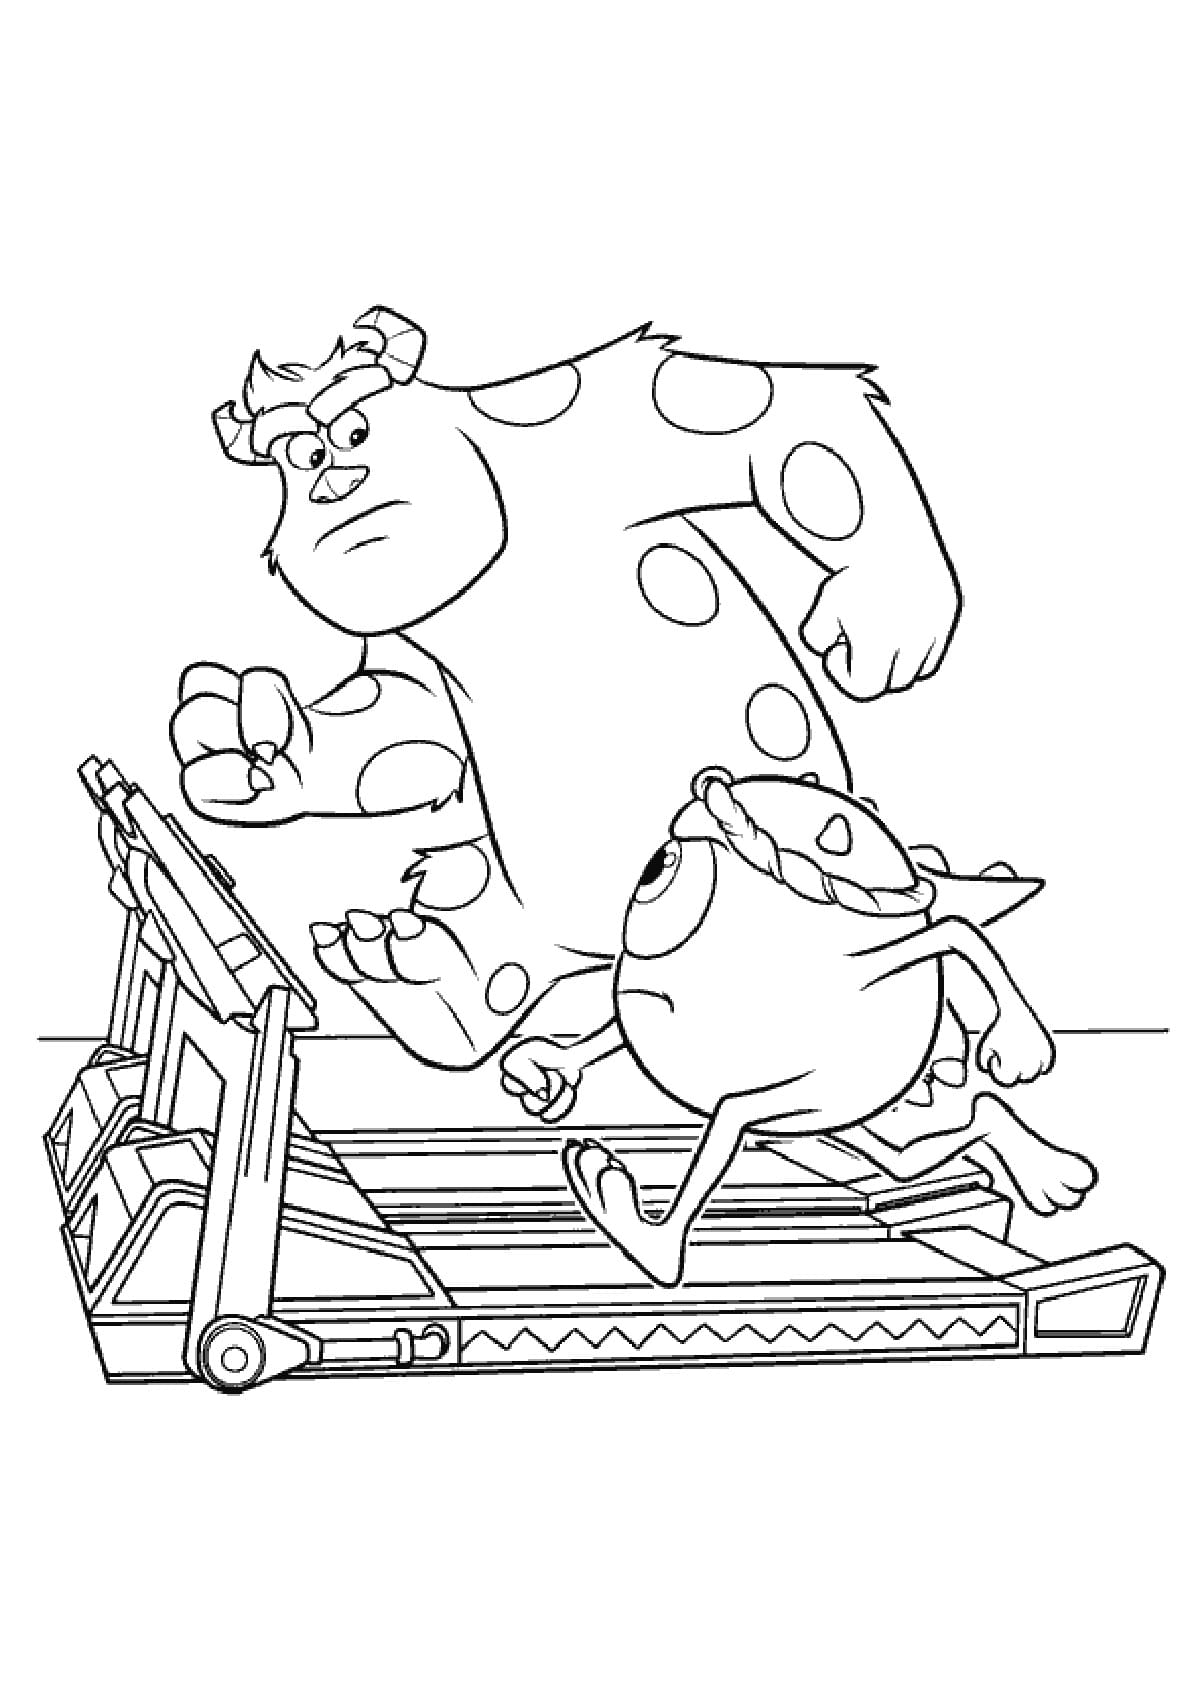 Monsters Inc Coloring Pages : boo sully and mike Monster Inc Coloring